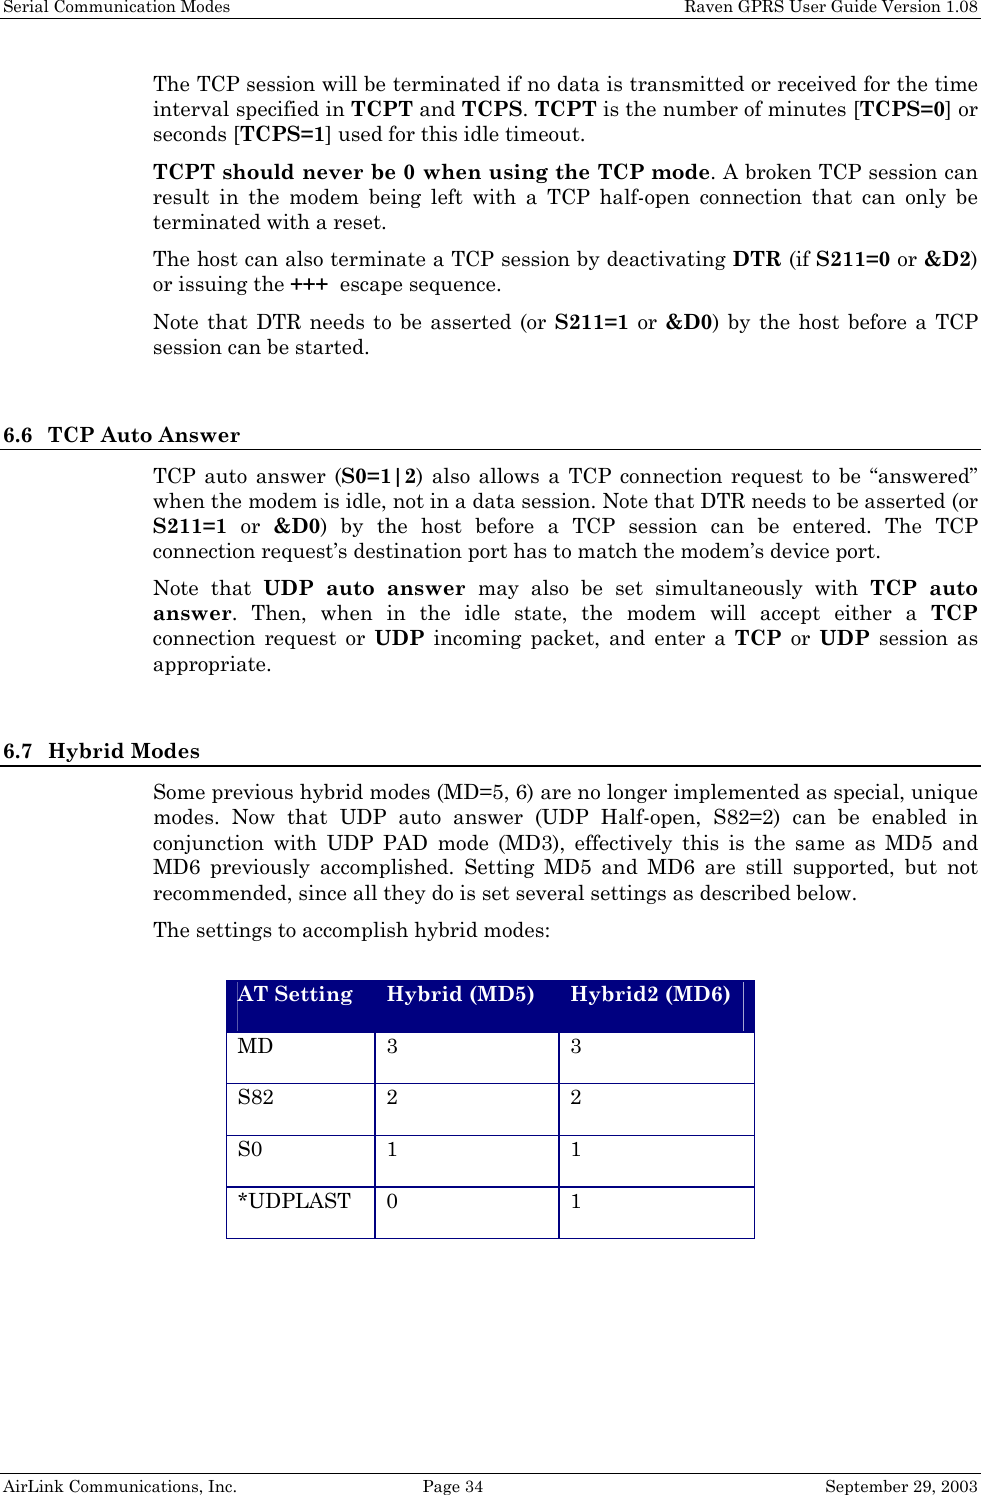 Serial Communication Modes    Raven GPRS User Guide Version 1.08 AirLink Communications, Inc.  Page 34  September 29, 2003 The TCP session will be terminated if no data is transmitted or received for the time interval specified in TCPT and TCPS. TCPT is the number of minutes [TCPS=0] or seconds [TCPS=1] used for this idle timeout.  TCPT should never be 0 when using the TCP mode. A broken TCP session can result in the modem being left with a TCP half-open connection that can only be terminated with a reset. The host can also terminate a TCP session by deactivating DTR (if S211=0 or &amp;D2) or issuing the +++  escape sequence. Note that DTR needs to be asserted (or S211=1 or &amp;D0) by the host before a TCP session can be started.  6.6 TCP Auto Answer TCP auto answer (S0=1|2) also allows a TCP connection request to be “answered” when the modem is idle, not in a data session. Note that DTR needs to be asserted (or S211=1 or &amp;D0) by the host before a TCP session can be entered. The TCP connection request’s destination port has to match the modem’s device port. Note that UDP auto answer may also be set simultaneously with TCP auto answer. Then, when in the idle state, the modem will accept either a TCP connection request or UDP incoming packet, and enter a TCP or UDP session as appropriate.  6.7 Hybrid Modes Some previous hybrid modes (MD=5, 6) are no longer implemented as special, unique modes. Now that UDP auto answer (UDP Half-open, S82=2) can be enabled in conjunction with UDP PAD mode (MD3), effectively this is the same as MD5 and MD6 previously accomplished. Setting MD5 and MD6 are still supported, but not recommended, since all they do is set several settings as described below. The settings to accomplish hybrid modes:  AT Setting Hybrid (MD5) Hybrid2 (MD6) MD 3 3 S82 2 2 S0 1 1 *UDPLAST 0 1  